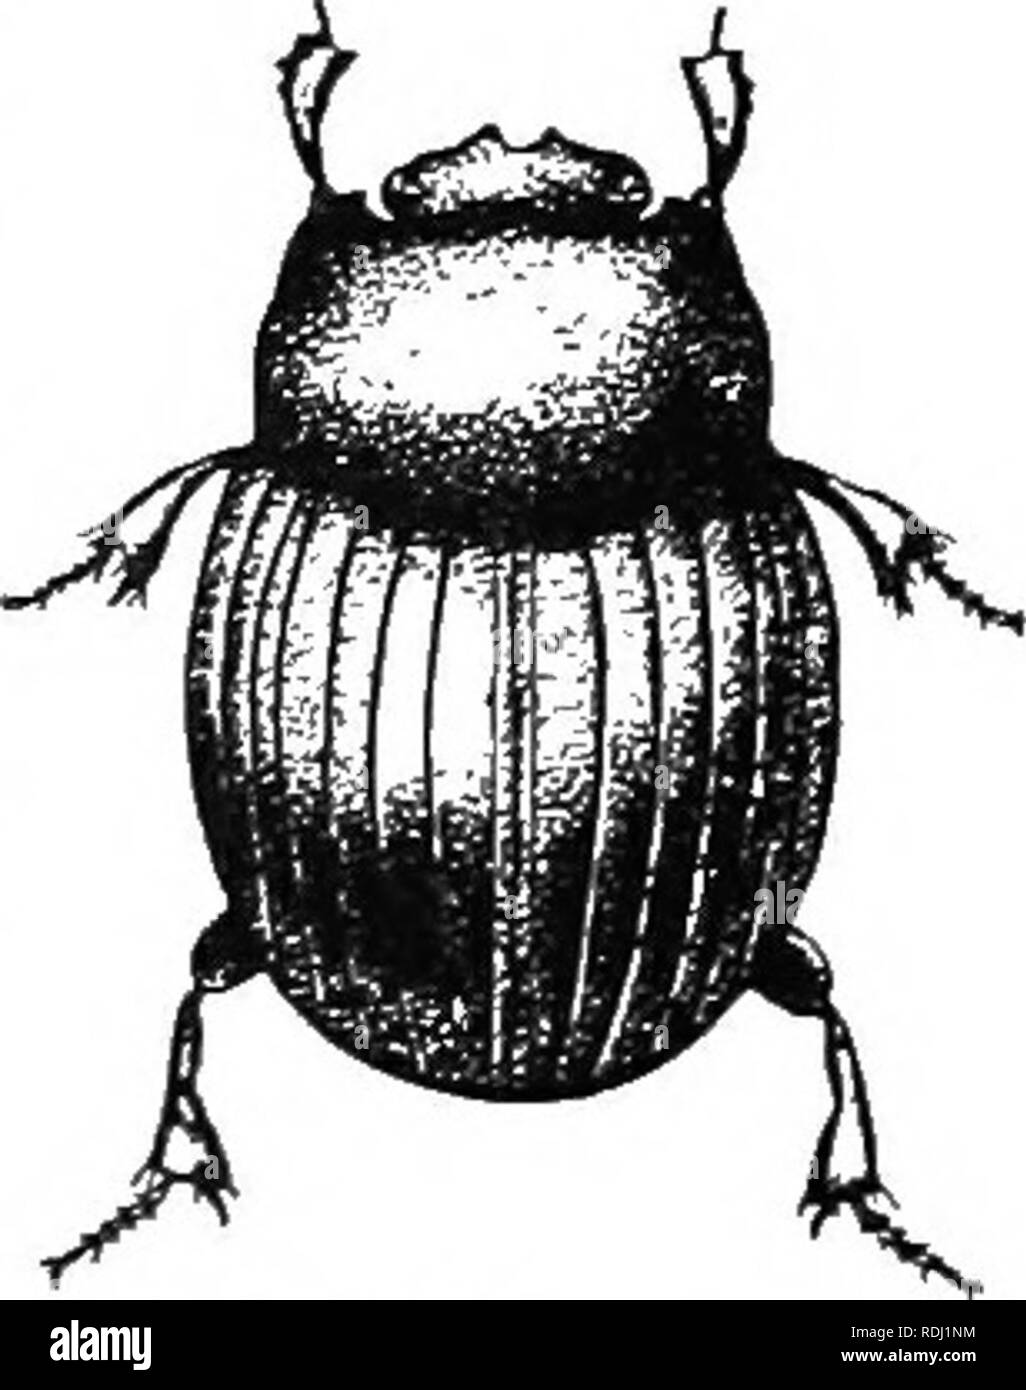 . An illustrated descriptive catalogue of the coleoptera or beetles (exclusive of the Rhynchophora) known to occur in Indiana : with bibliography and descriptions of new species . Beetles. THE lamei.ljcorn bet:tles. 915 2Tirs beneath flat stones on hillsides near Wyandotte Cave. This and the next are the smallest species of the genus. L727 (5439). Canthon pebpubxi's Lee, Journ. Phil. Acad. Nat. Sci., Ser. 2, I, 1847, 85. Broadly oval or subrotund. Brown bronzed, shining. Thorax rather loarsely punctured. Elytra more finely punctured, each puncture bearing 1 very small, recumbent, scale-like ha Stock Photo